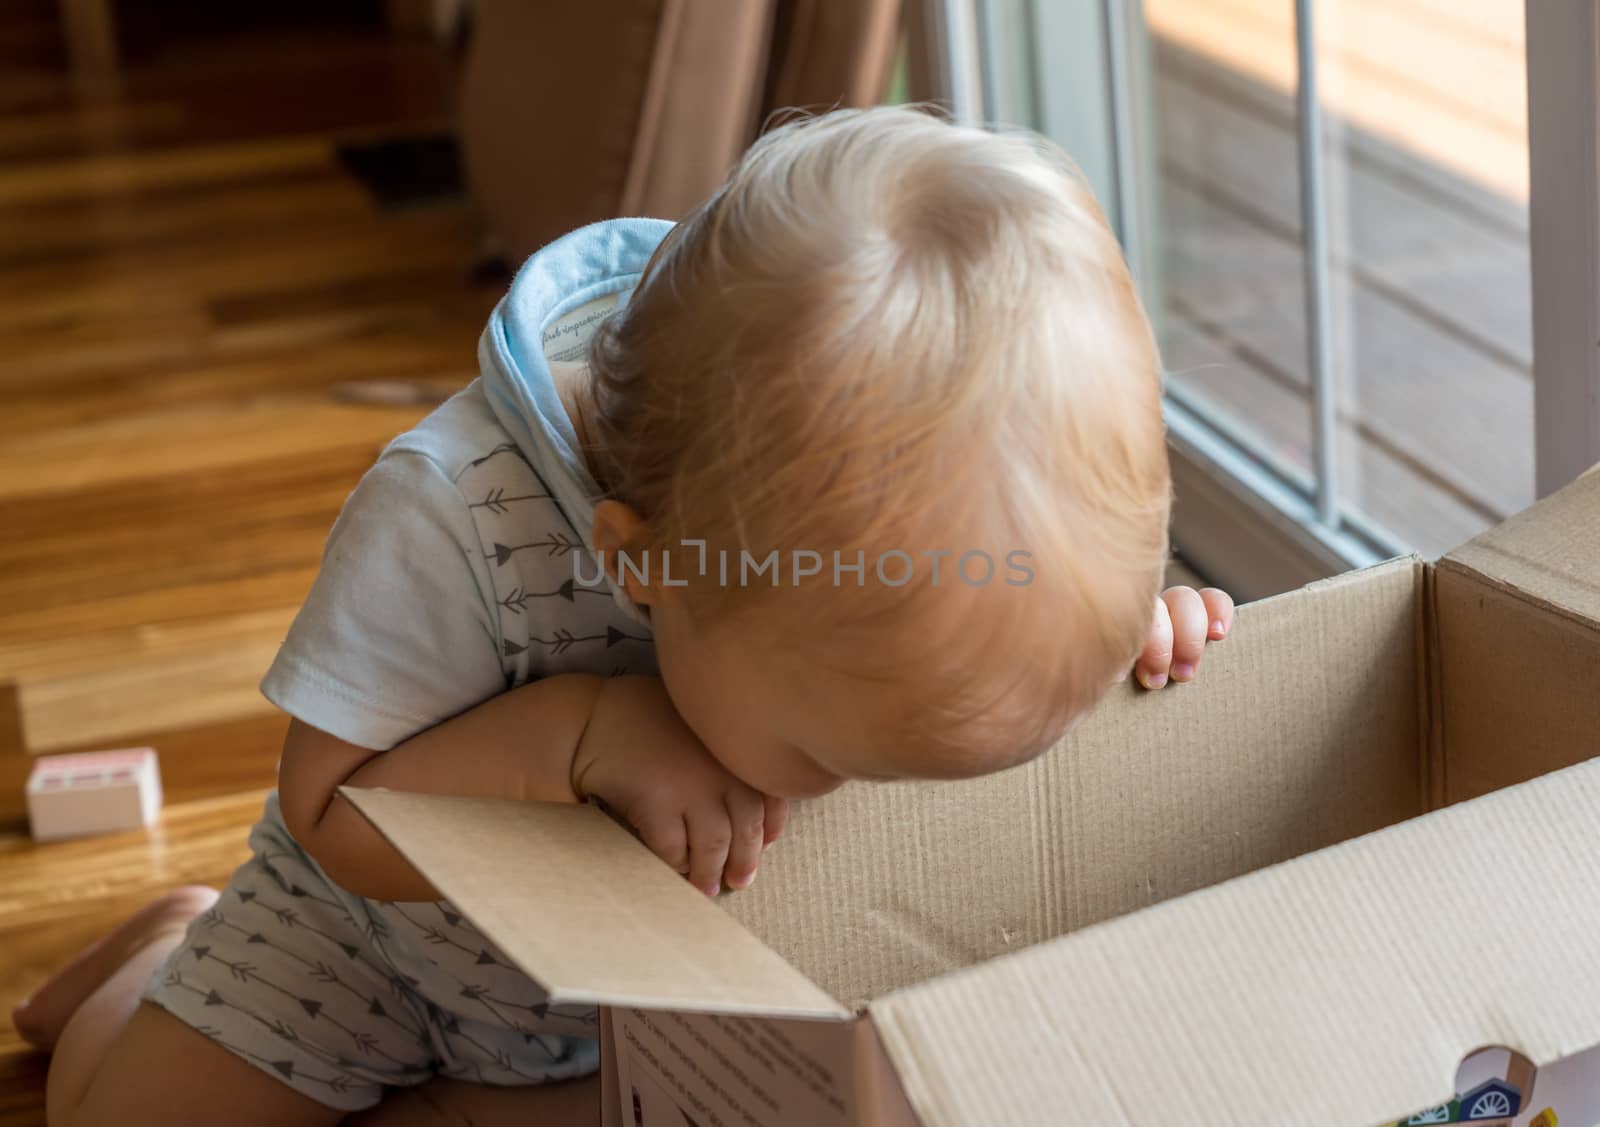 Young baby boy investigating a cardboard box and looking inside by steheap